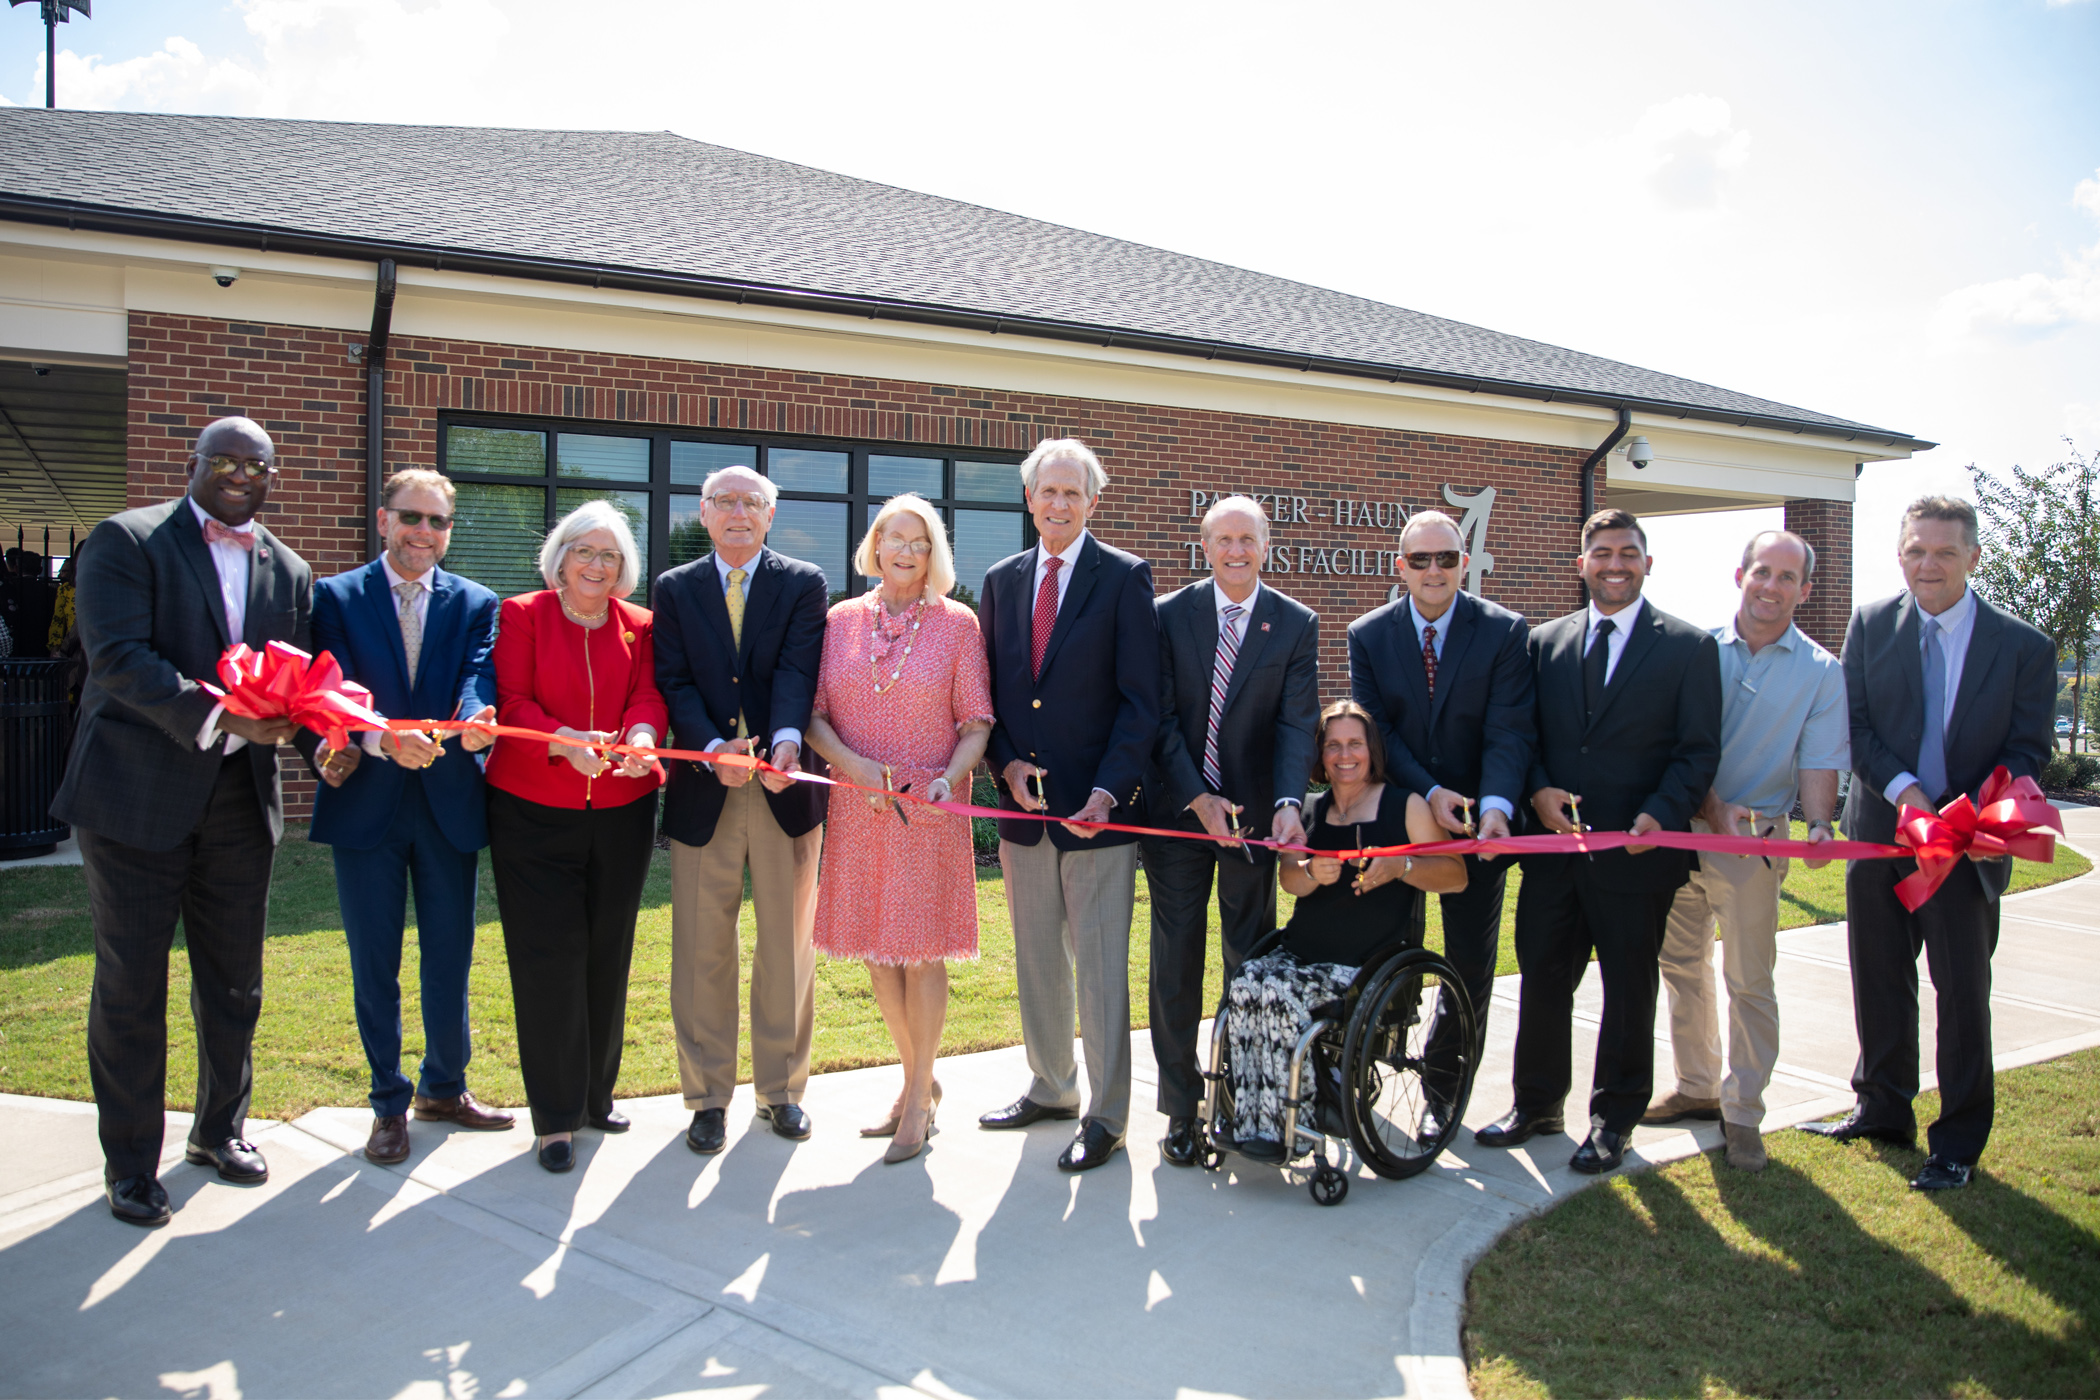 Several university representatives cutting the ribbon in front of the Parker-Haun Tennis Facility